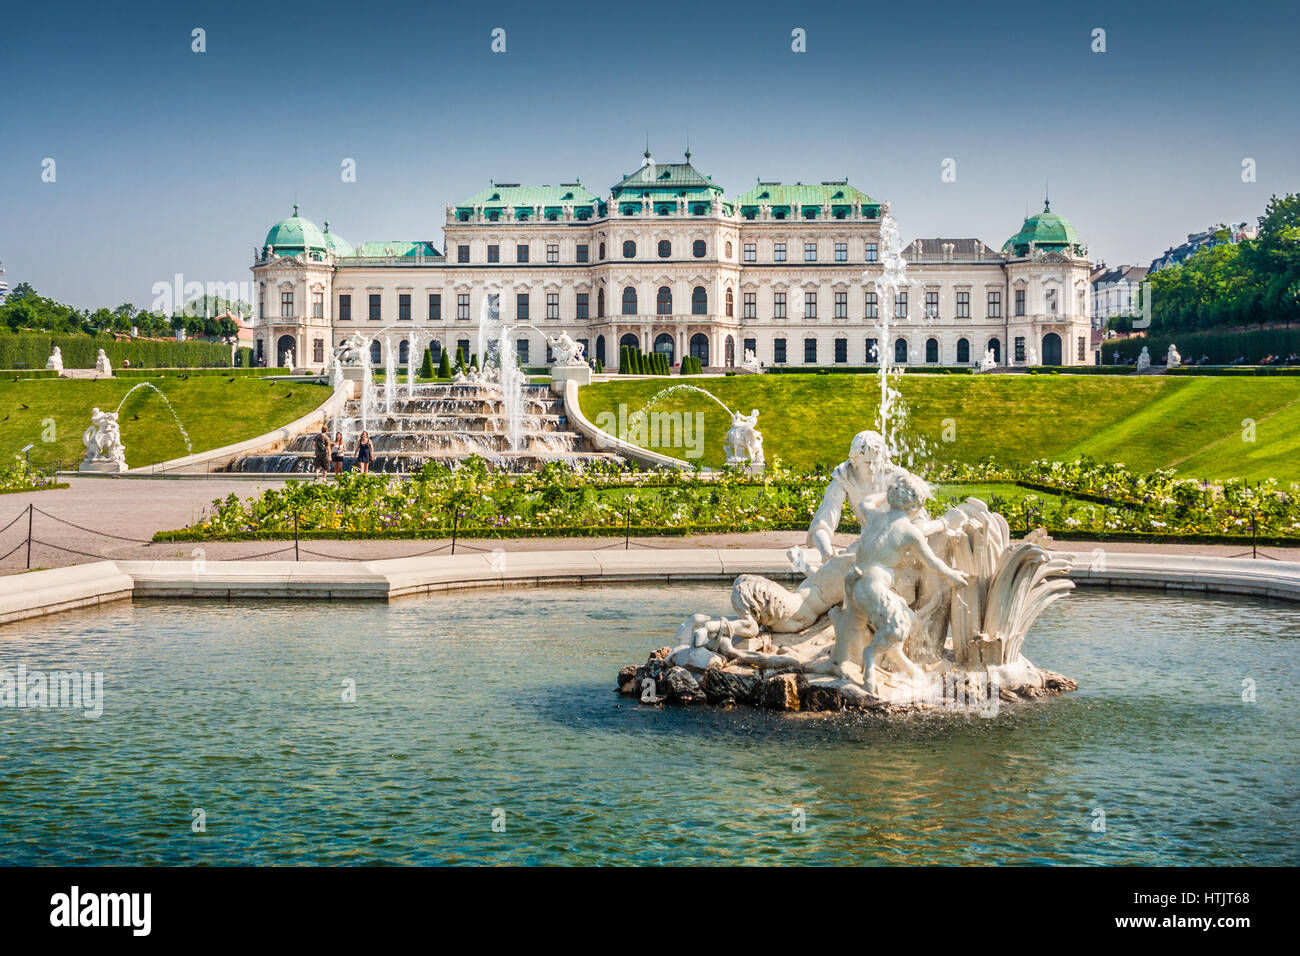 Beautiful view of famous Schloss Belvedere, built by Johann Lukas von Hildebrandt as a summer residence for Prince Eugene of Savoy, in Vienna, Austria Stock Photo